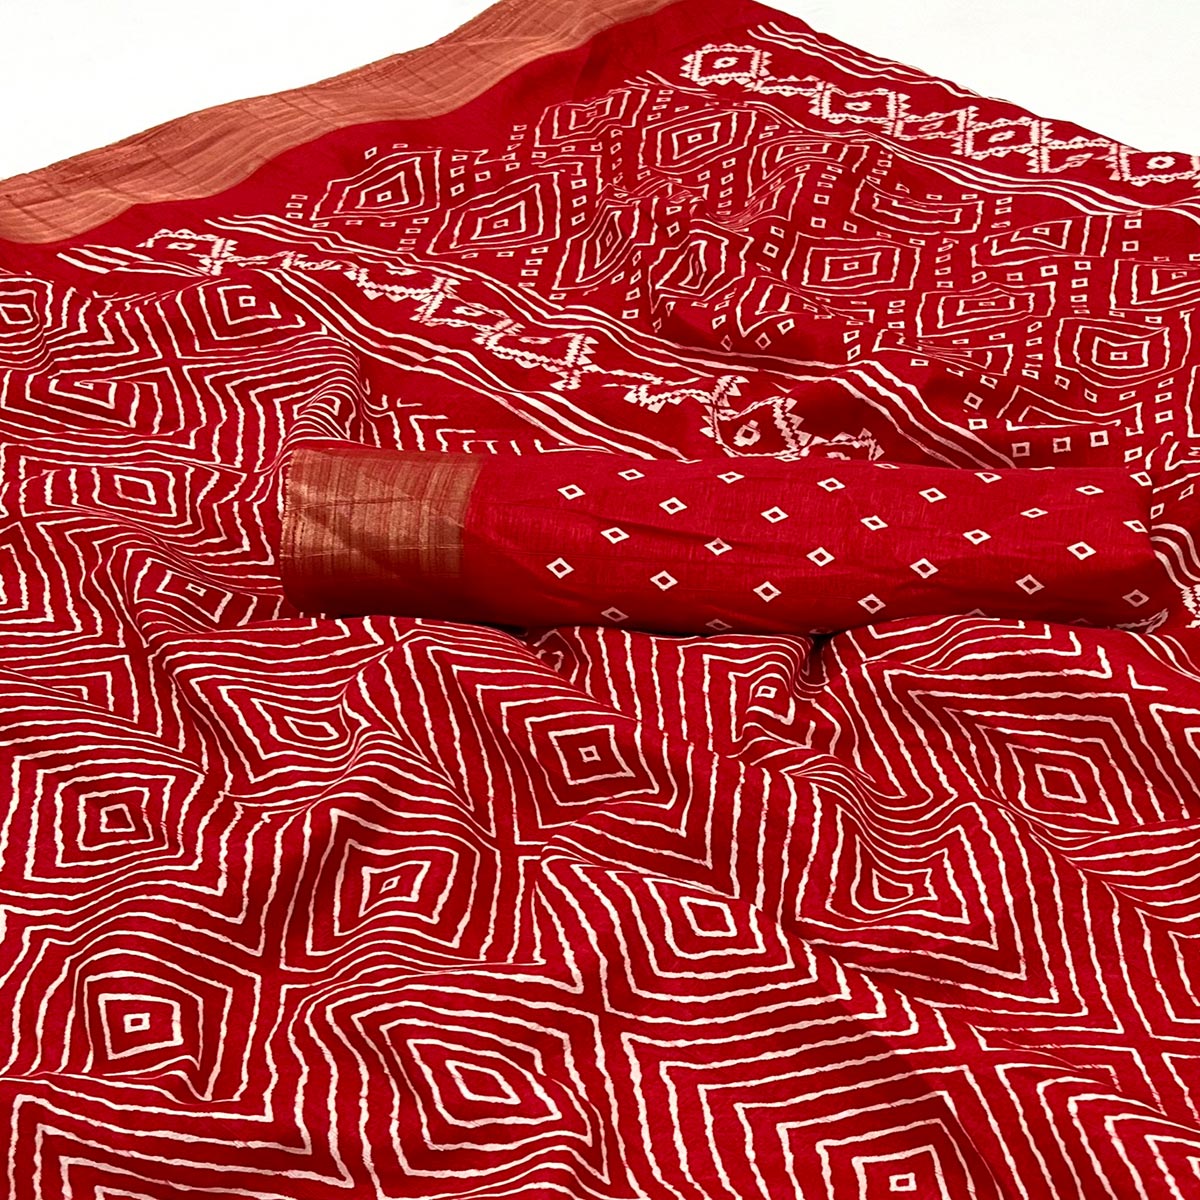 Red Printed Cotton Blend Saree With Woven Border